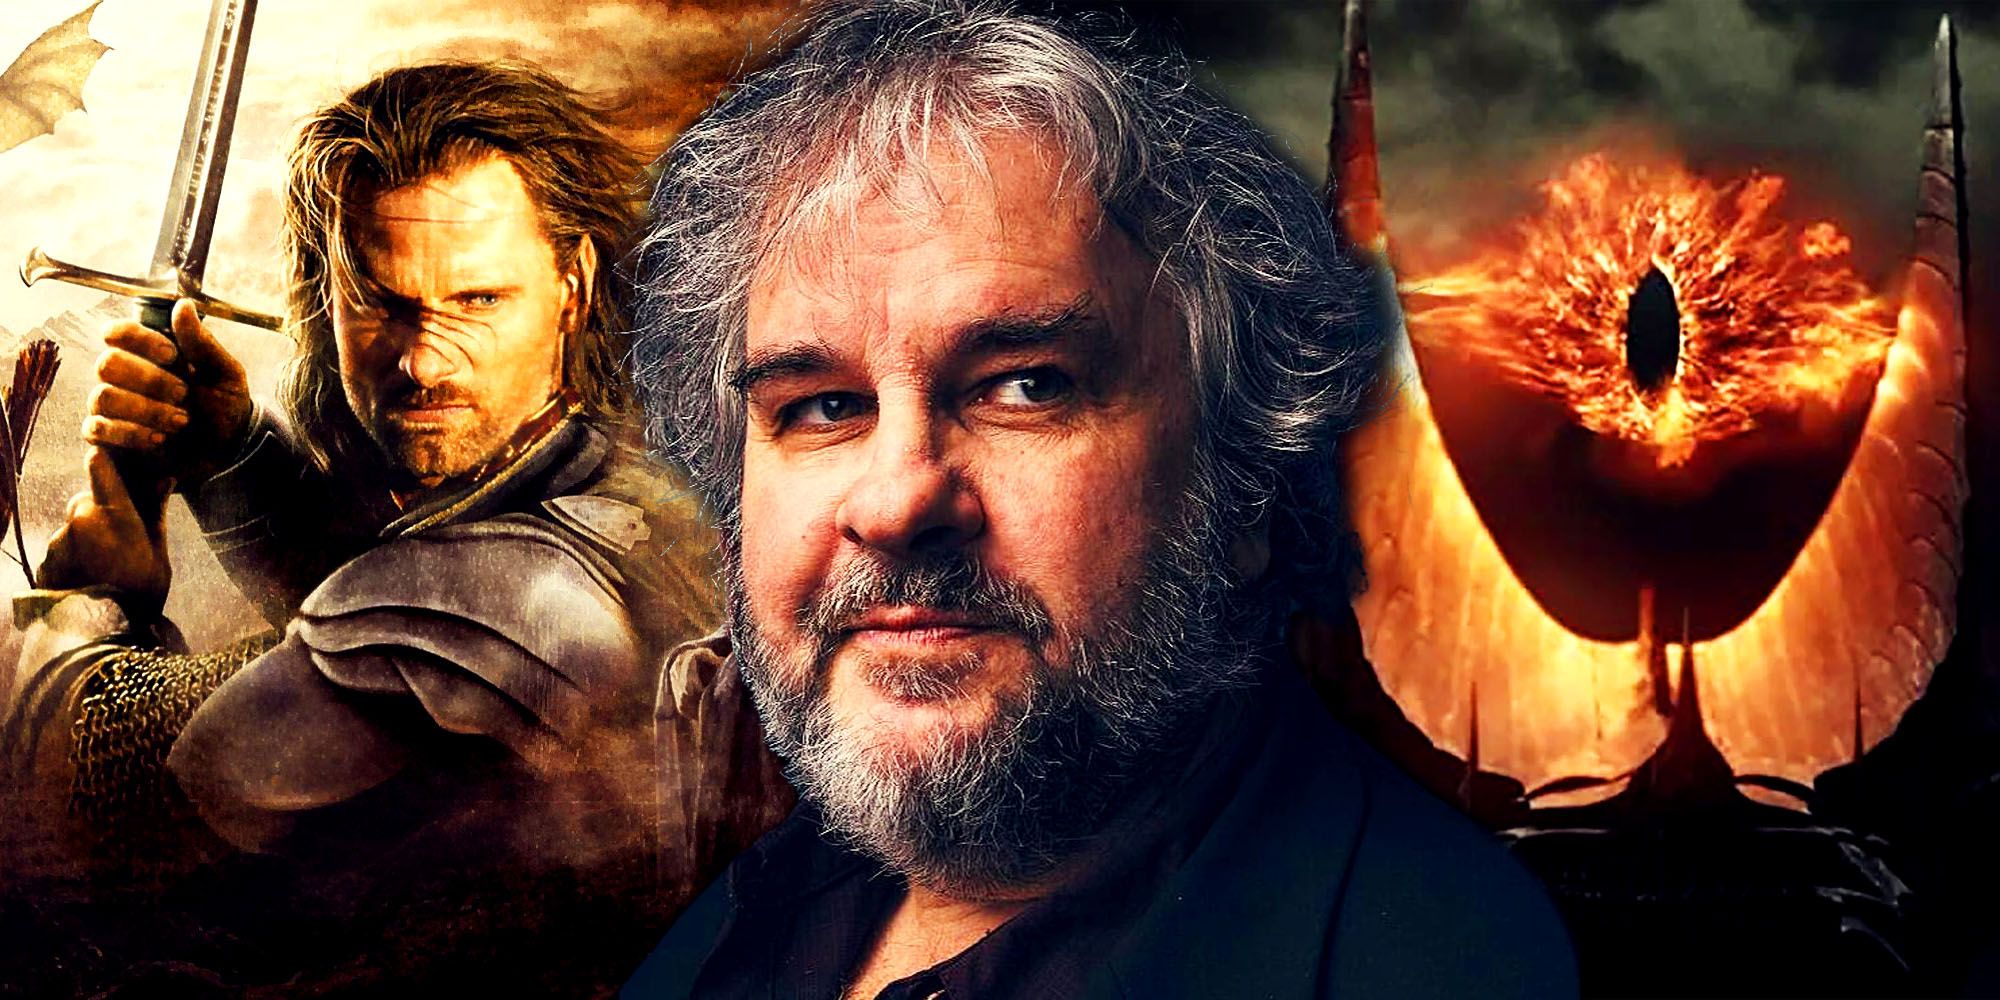 Differences Between J.R.R. Tolkien and Peter Jackson's The Lord of